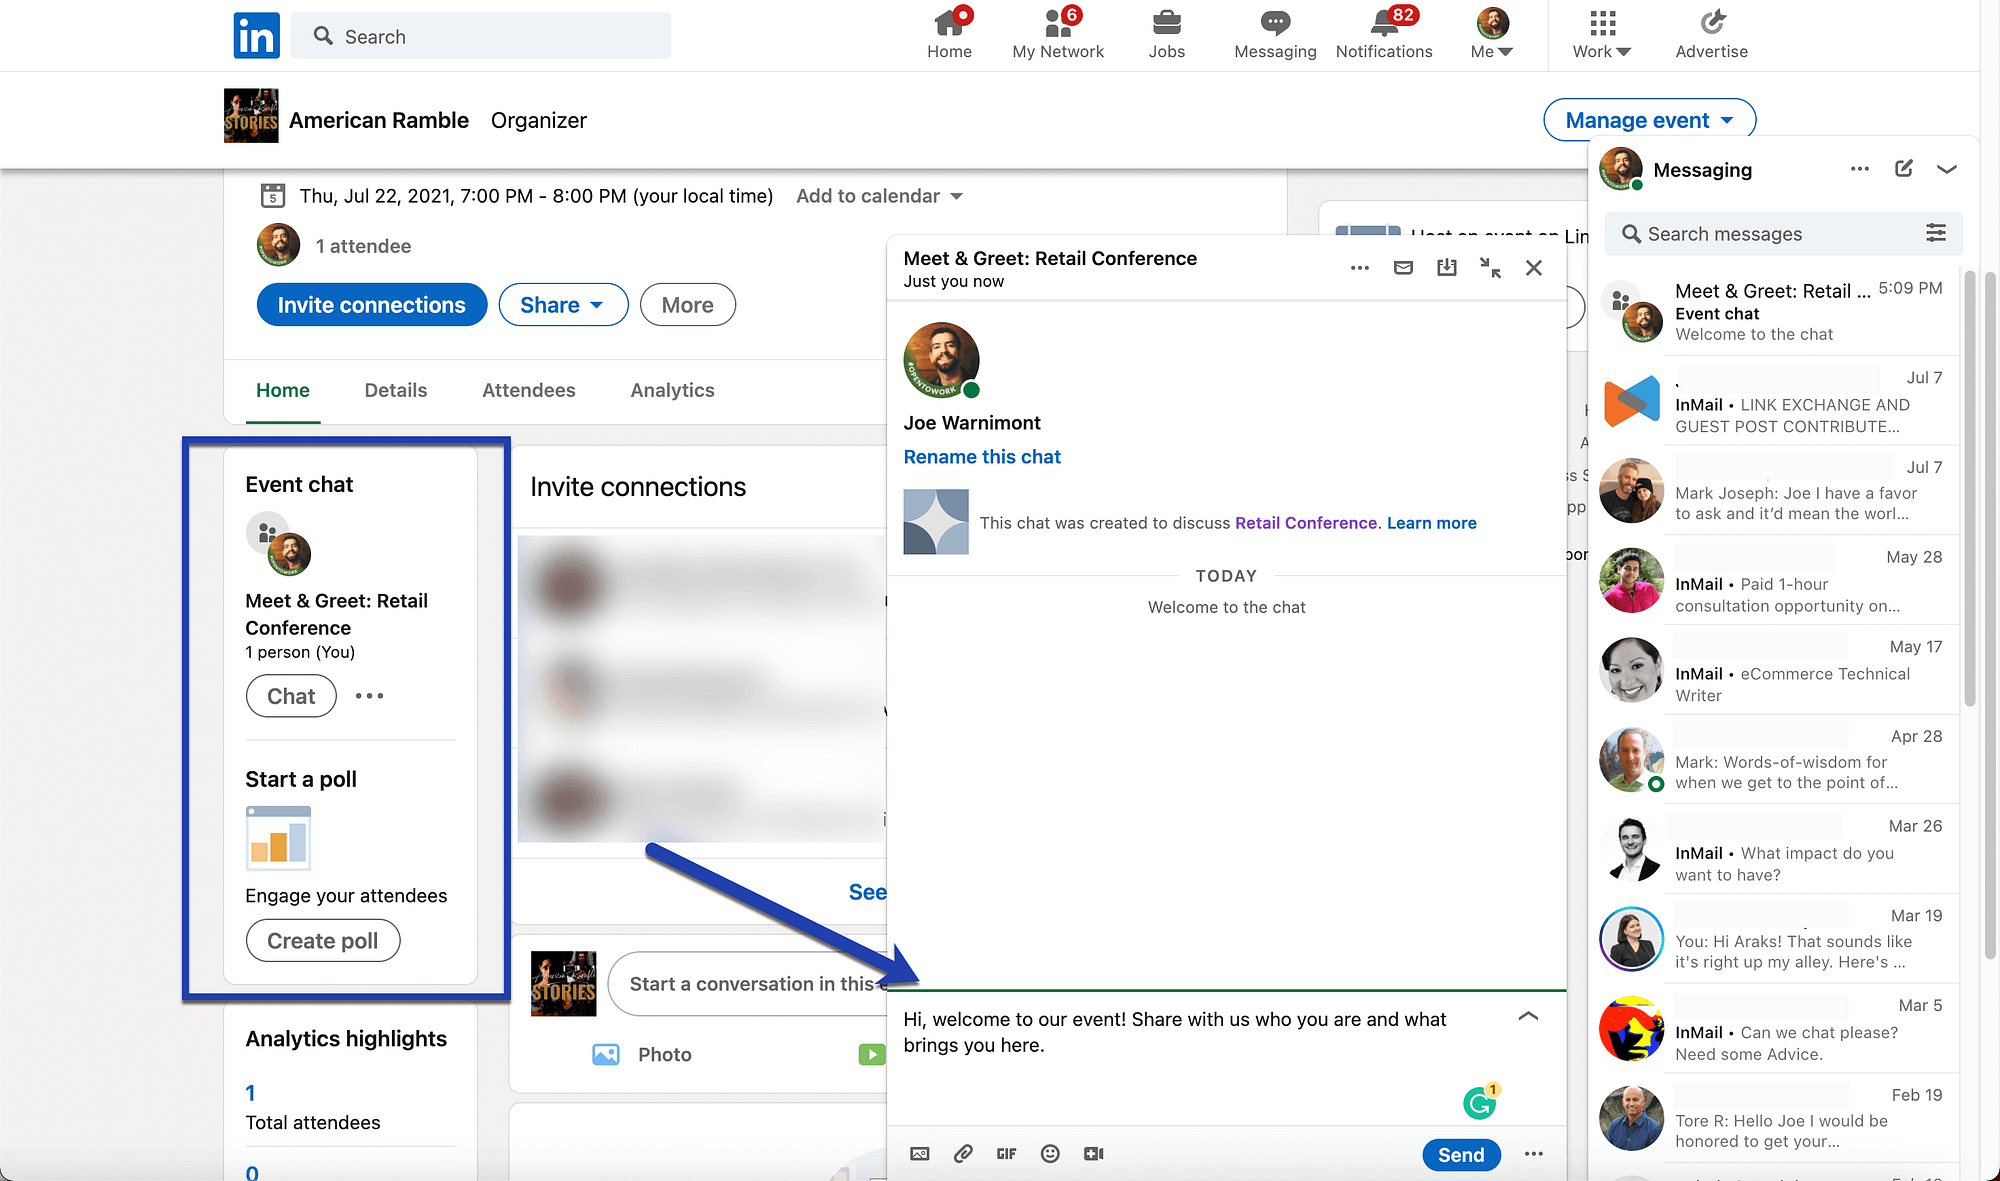 event chat in LinkedIn Messages